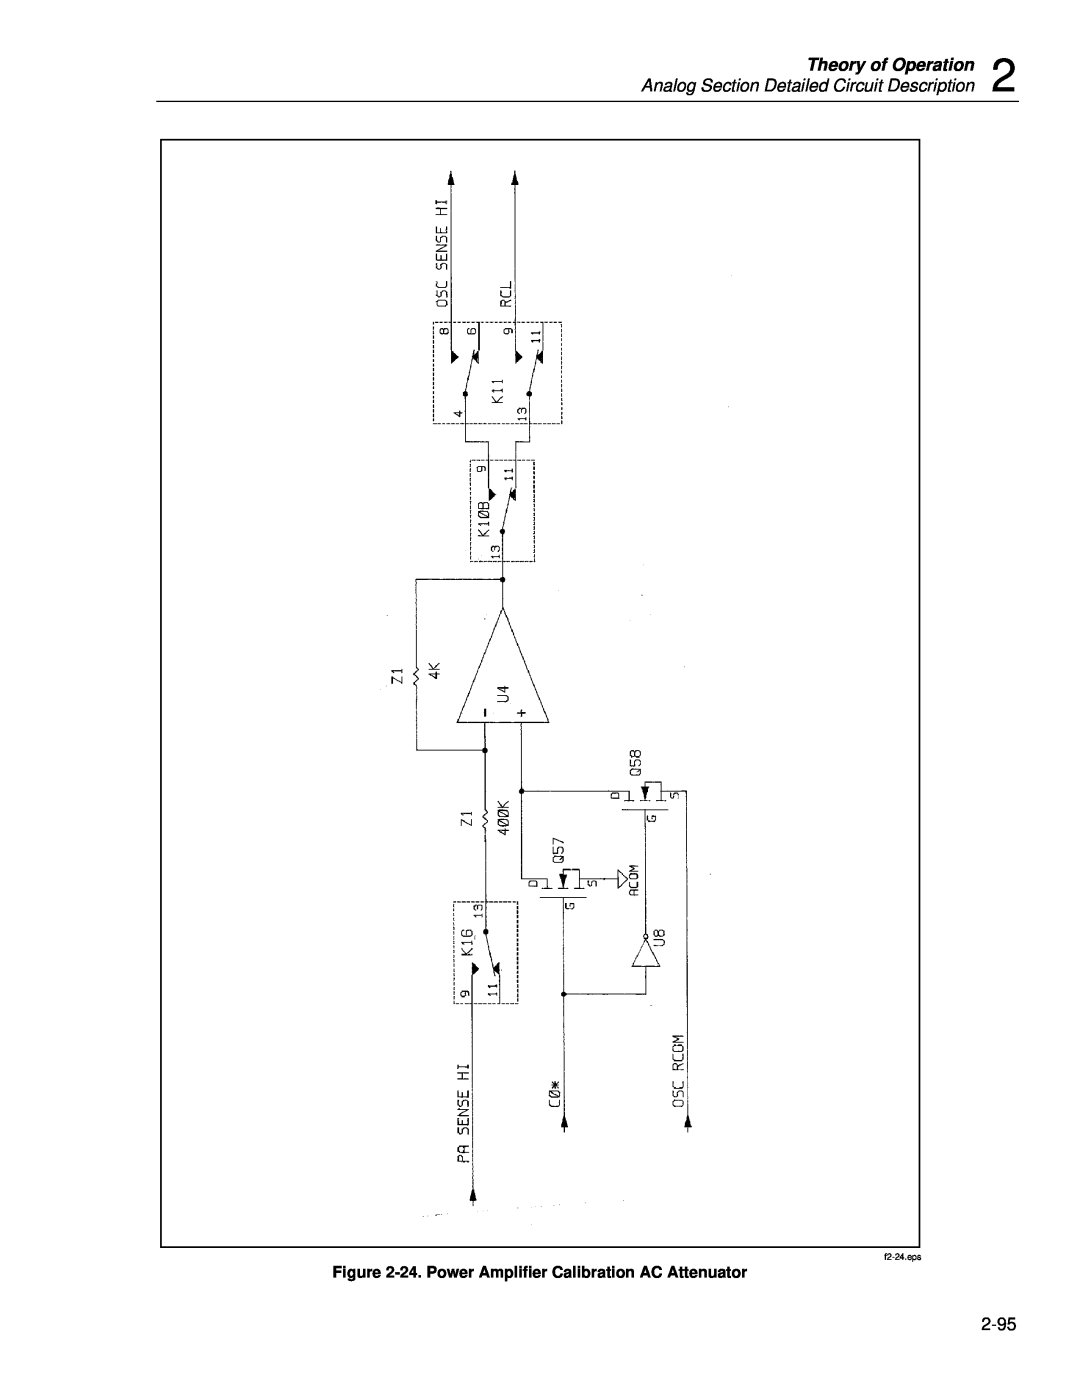 Fluke 5720A service manual Theory of Operation, Analog Section Detailed Circuit Description, f2-24.eps 